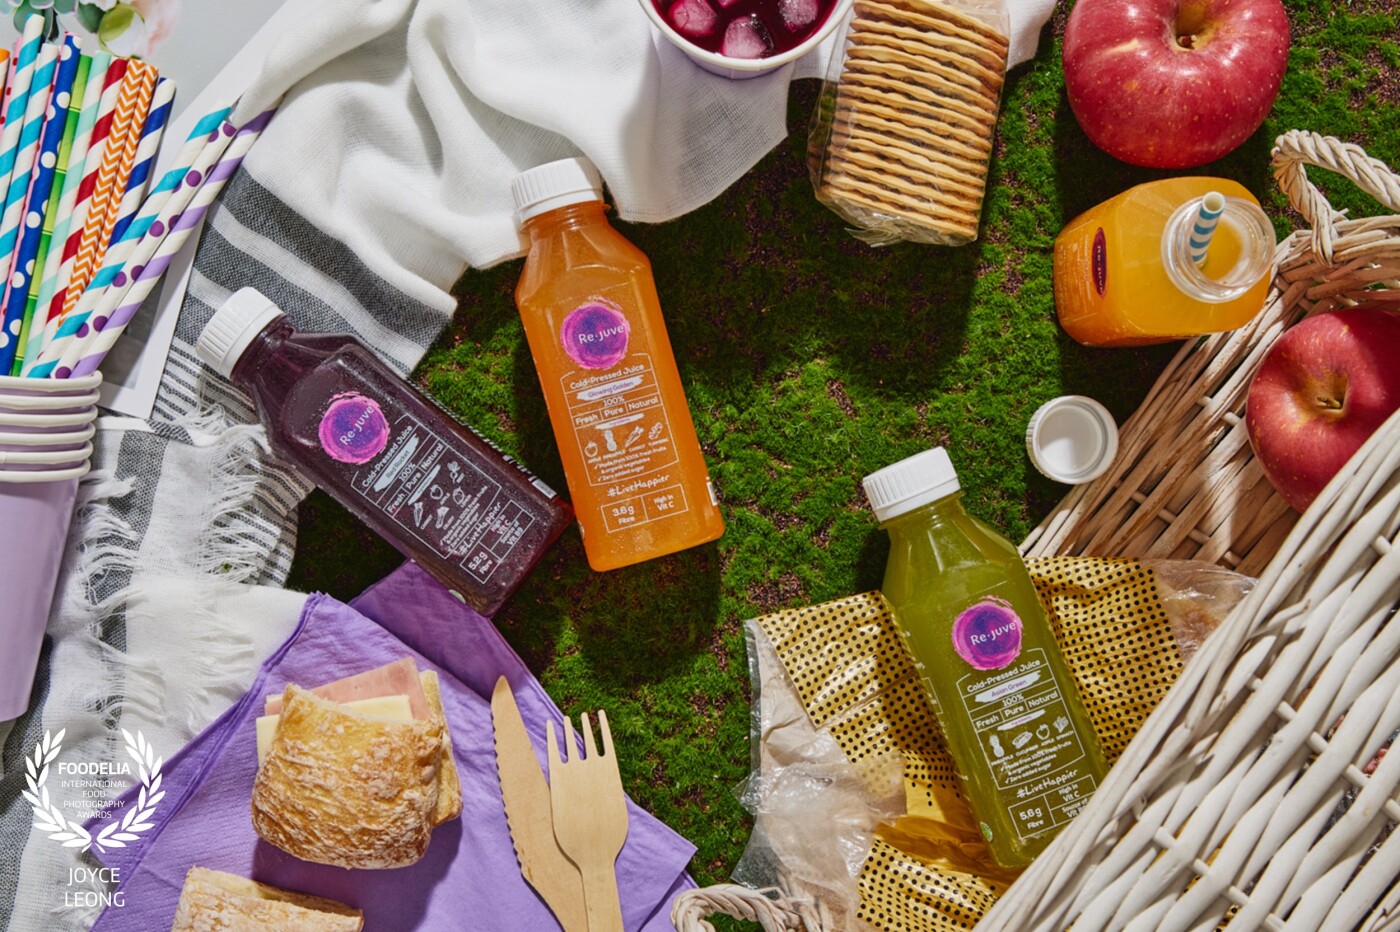 Created this for a client who wanted to showcase their juices in a lifestyle setting and a picnic on a bright sunny day was chosen for this image.